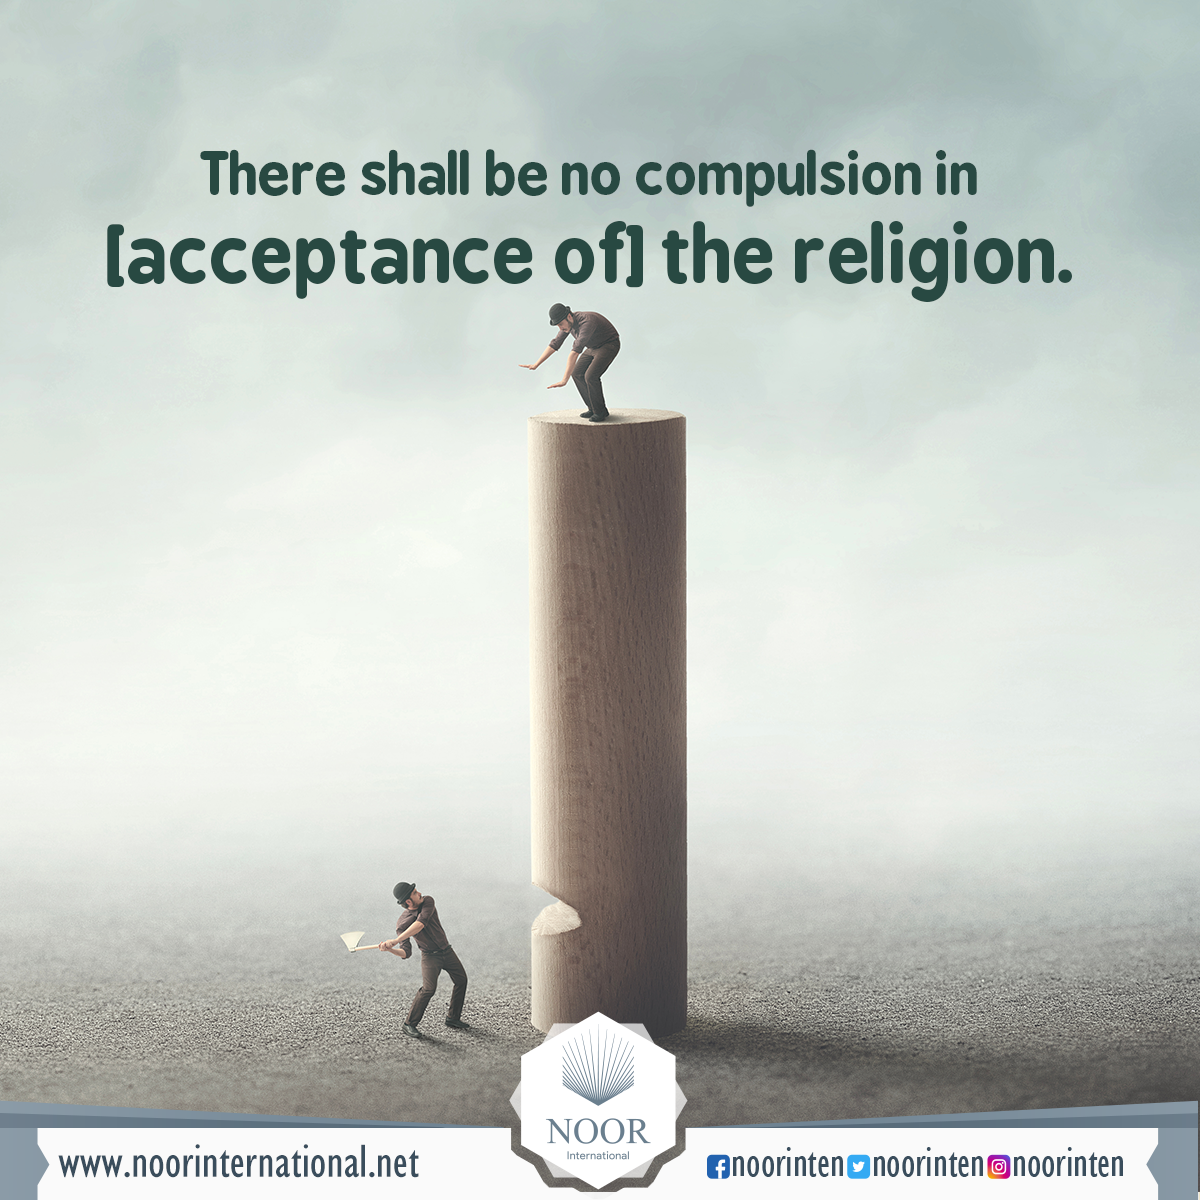 There shall be no compulsion in [acceptance of] the religion.